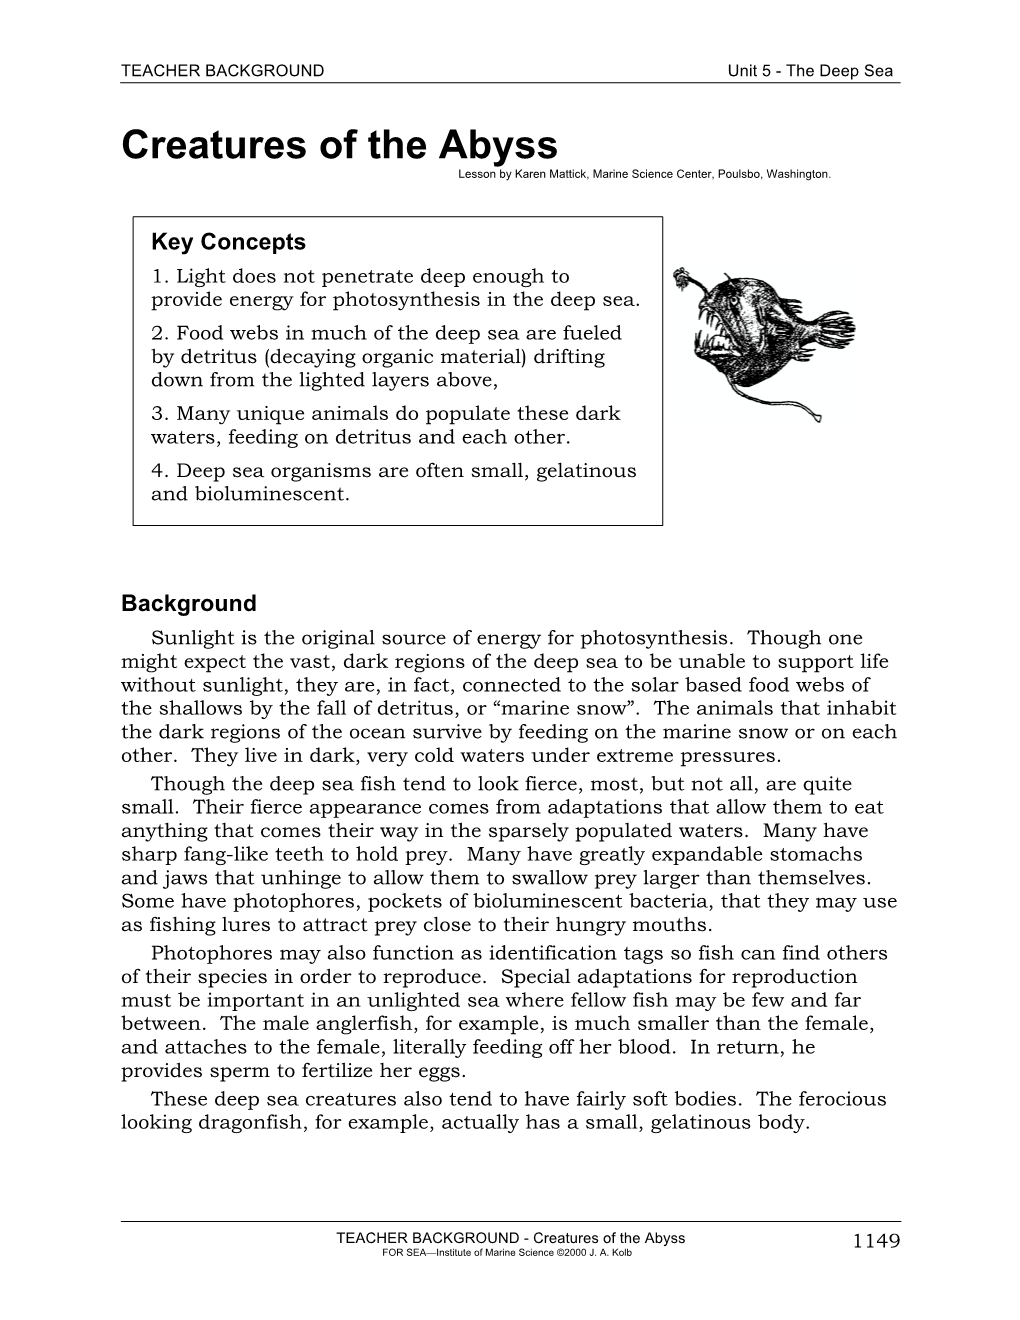 Creatures of the Abyss Lesson by Karen Mattick, Marine Science Center, Poulsbo, Washington